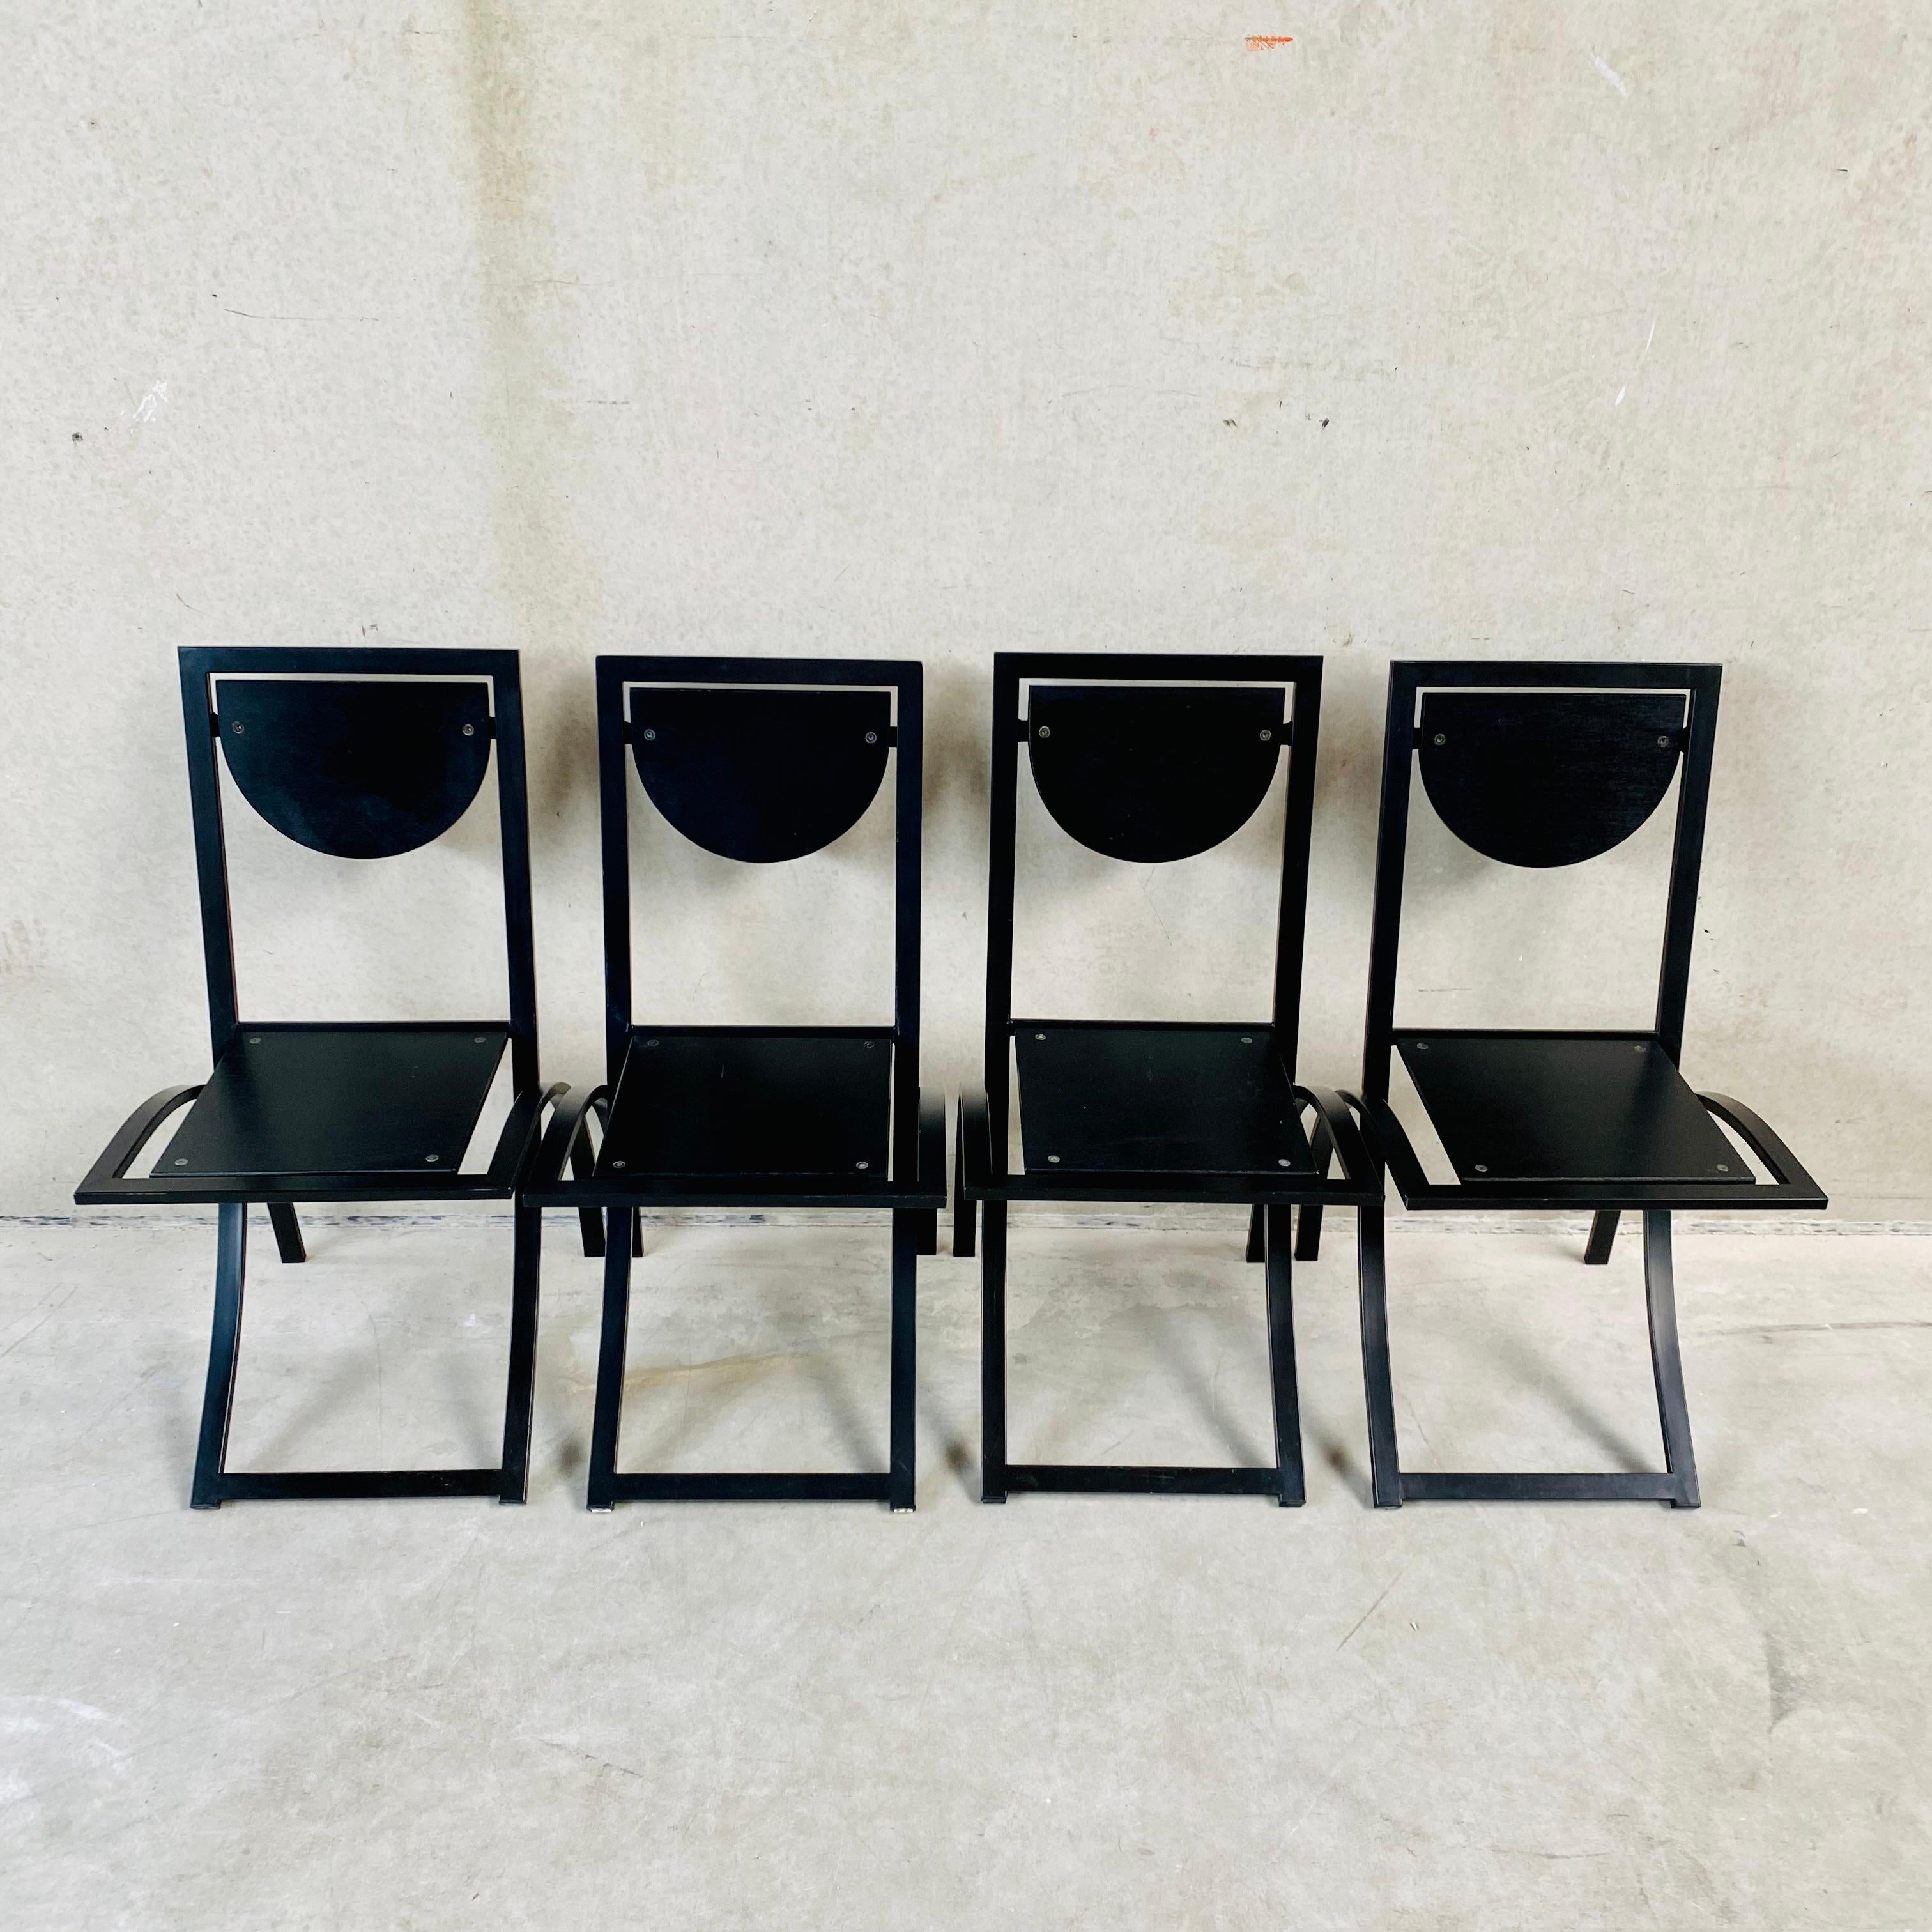 4 x KFF Black Smoked Oak Dining Chairs by Karl Friedrich Förster 1980 For Sale 2